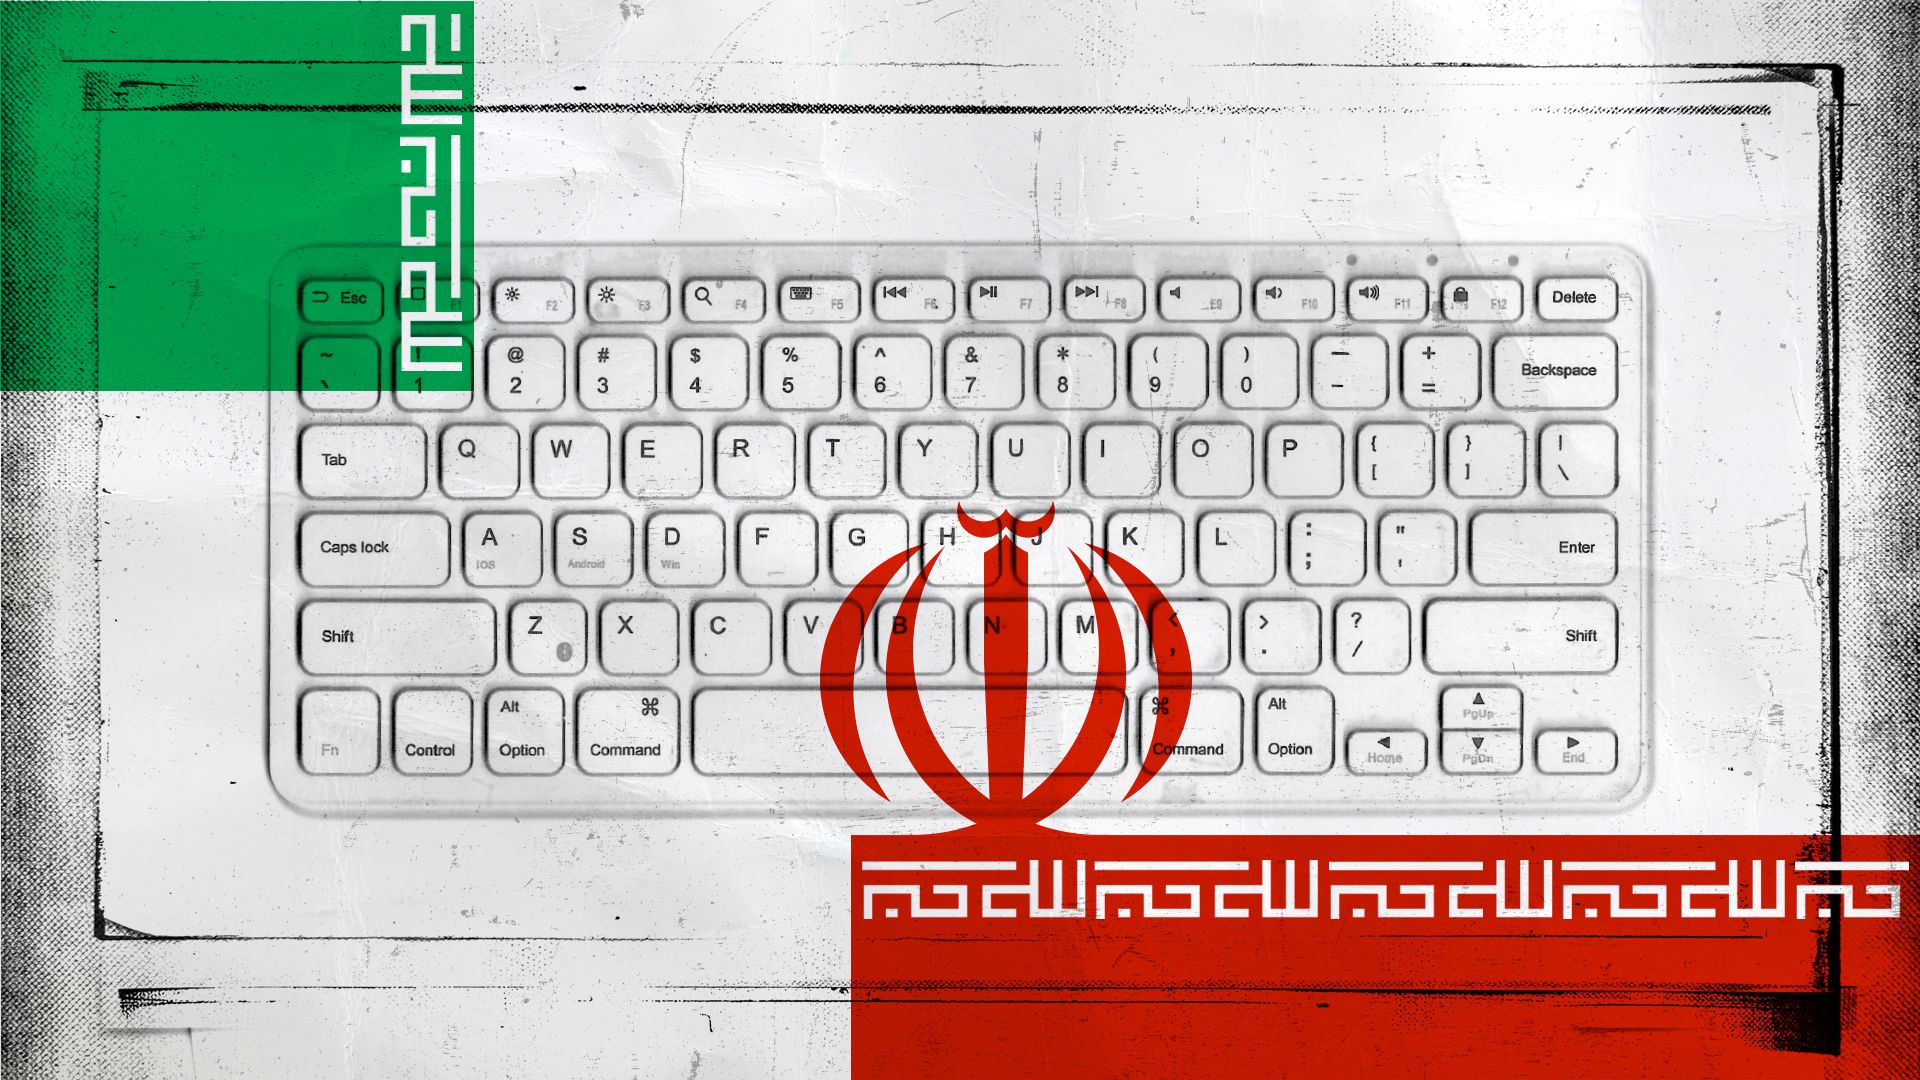 Illustration of a photocopied image of a keyboard with elements of the Iranian flag